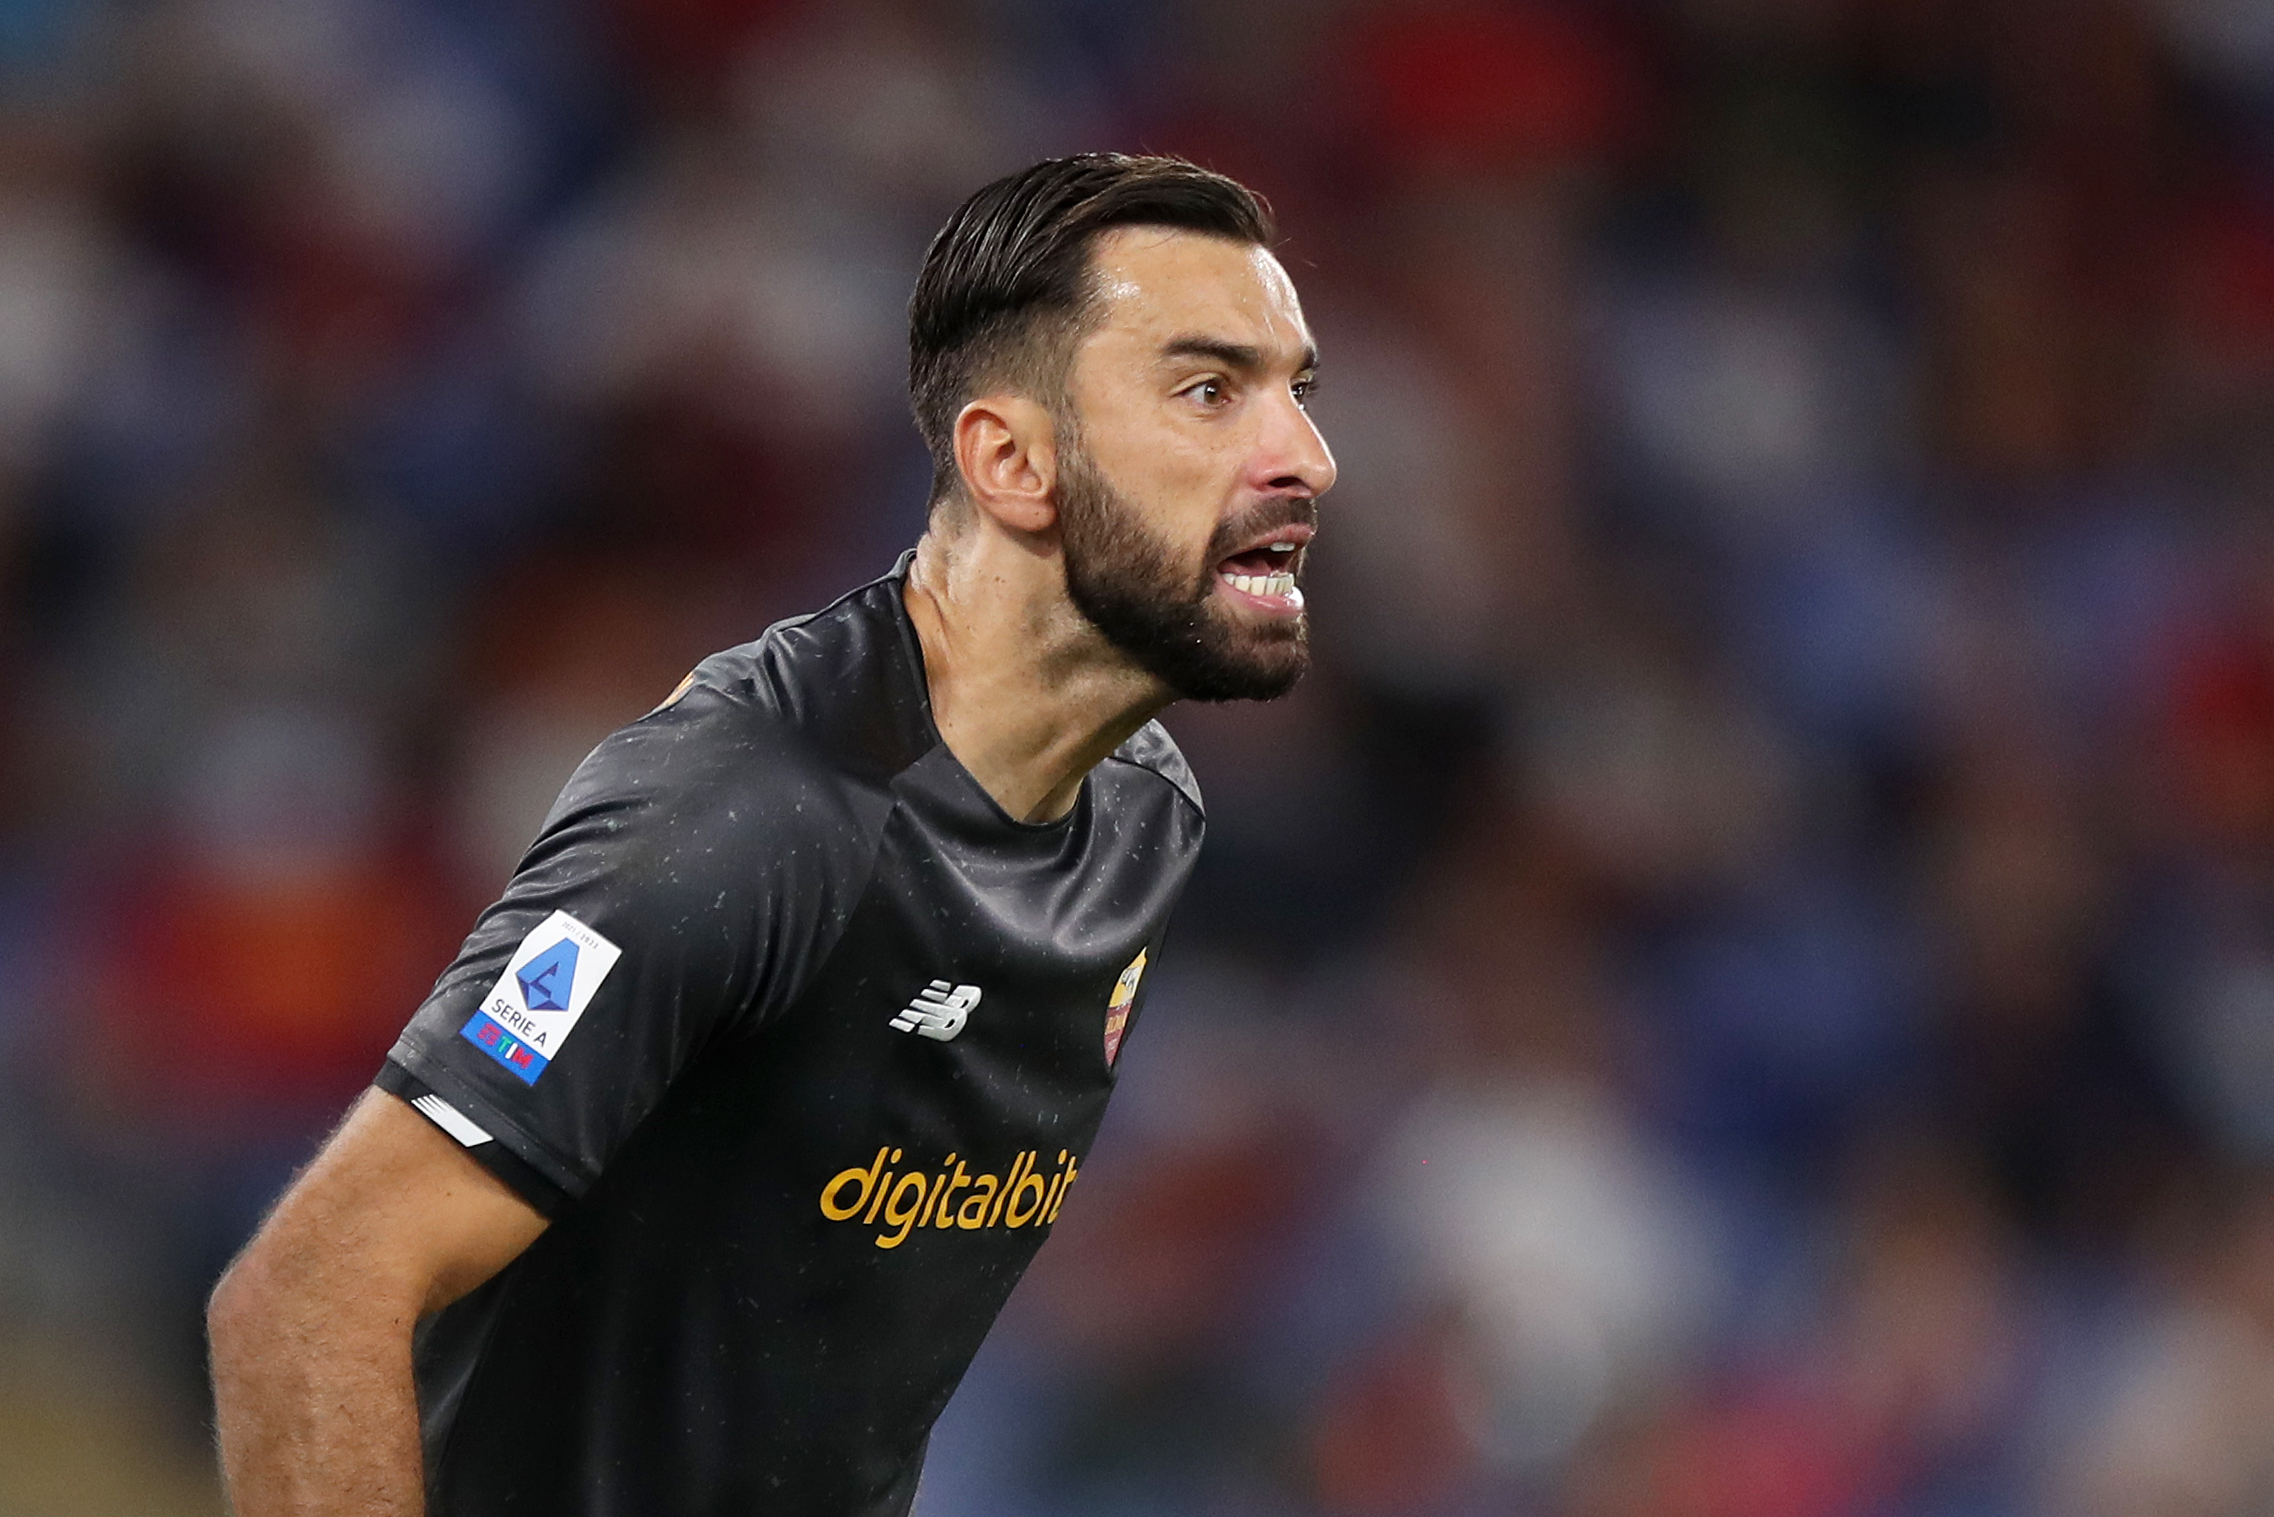 Rui Patricio is off to a slow start, and Roma could try to bring in another goalkeeper to challenge him, as Mile Svilar isn't ready yet.